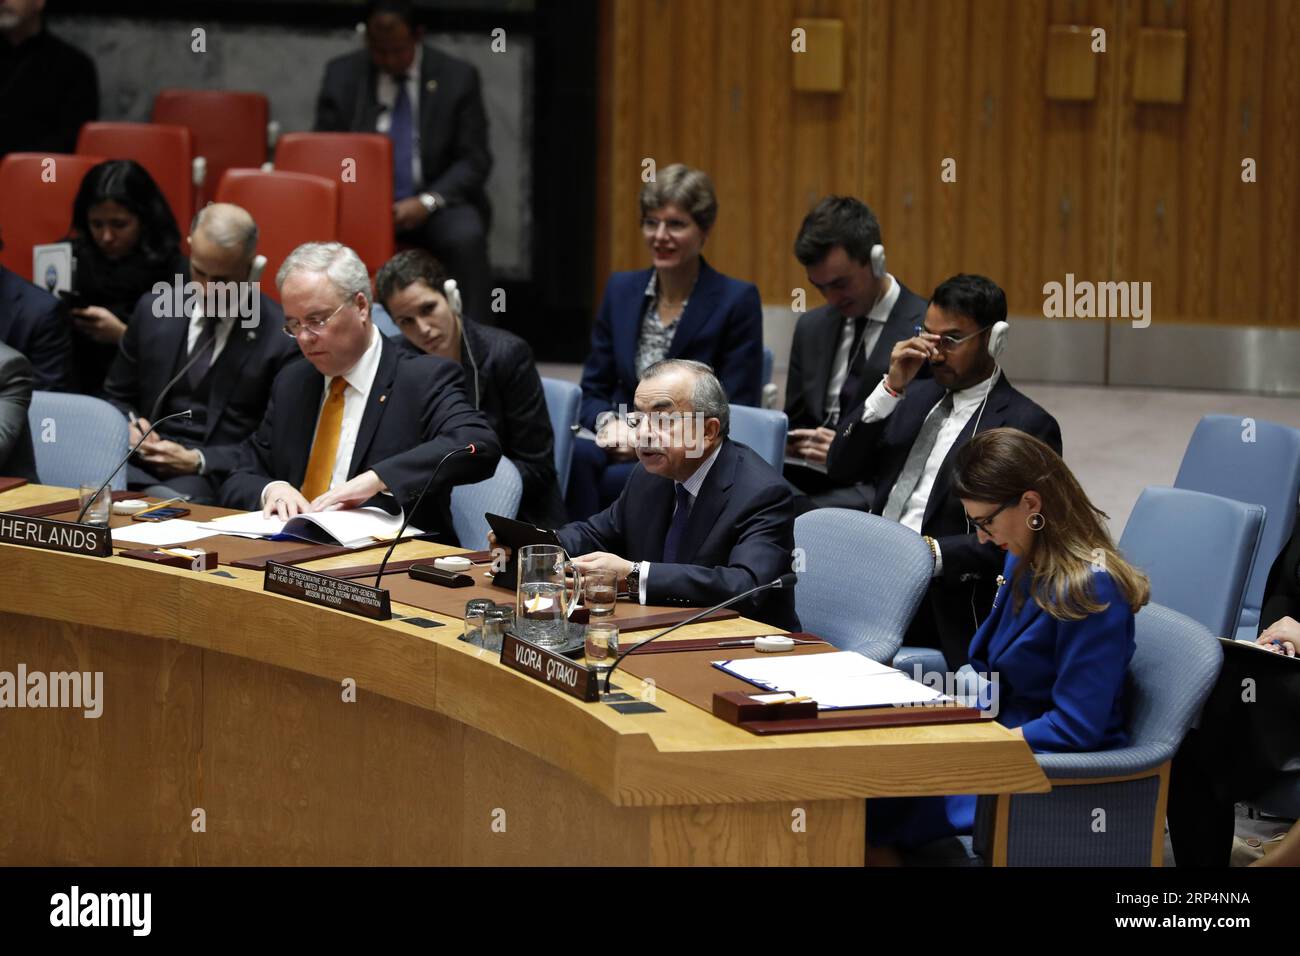 (181114) -- UNITED NATIONS, Nov. 14, 2018 -- Zahir Tanin (C, Front), Special Representative of the Secretary-General and Head of the United Nations Interim Administration Mission in Kosovo (UNMIK), addresses a Security Council meeting on Kosovo at the UN headquarters in New York, on Nov. 14, 2018. The top UN envoy in Kosovo on Wednesday called for social engagement for the success of negotiations on a possible new comprehensive agreement between Pristina and Belgrade. ) UN-SECURITY COUNCIL-MEETING-KOSOVO LixMuzi PUBLICATIONxNOTxINxCHN Stock Photo